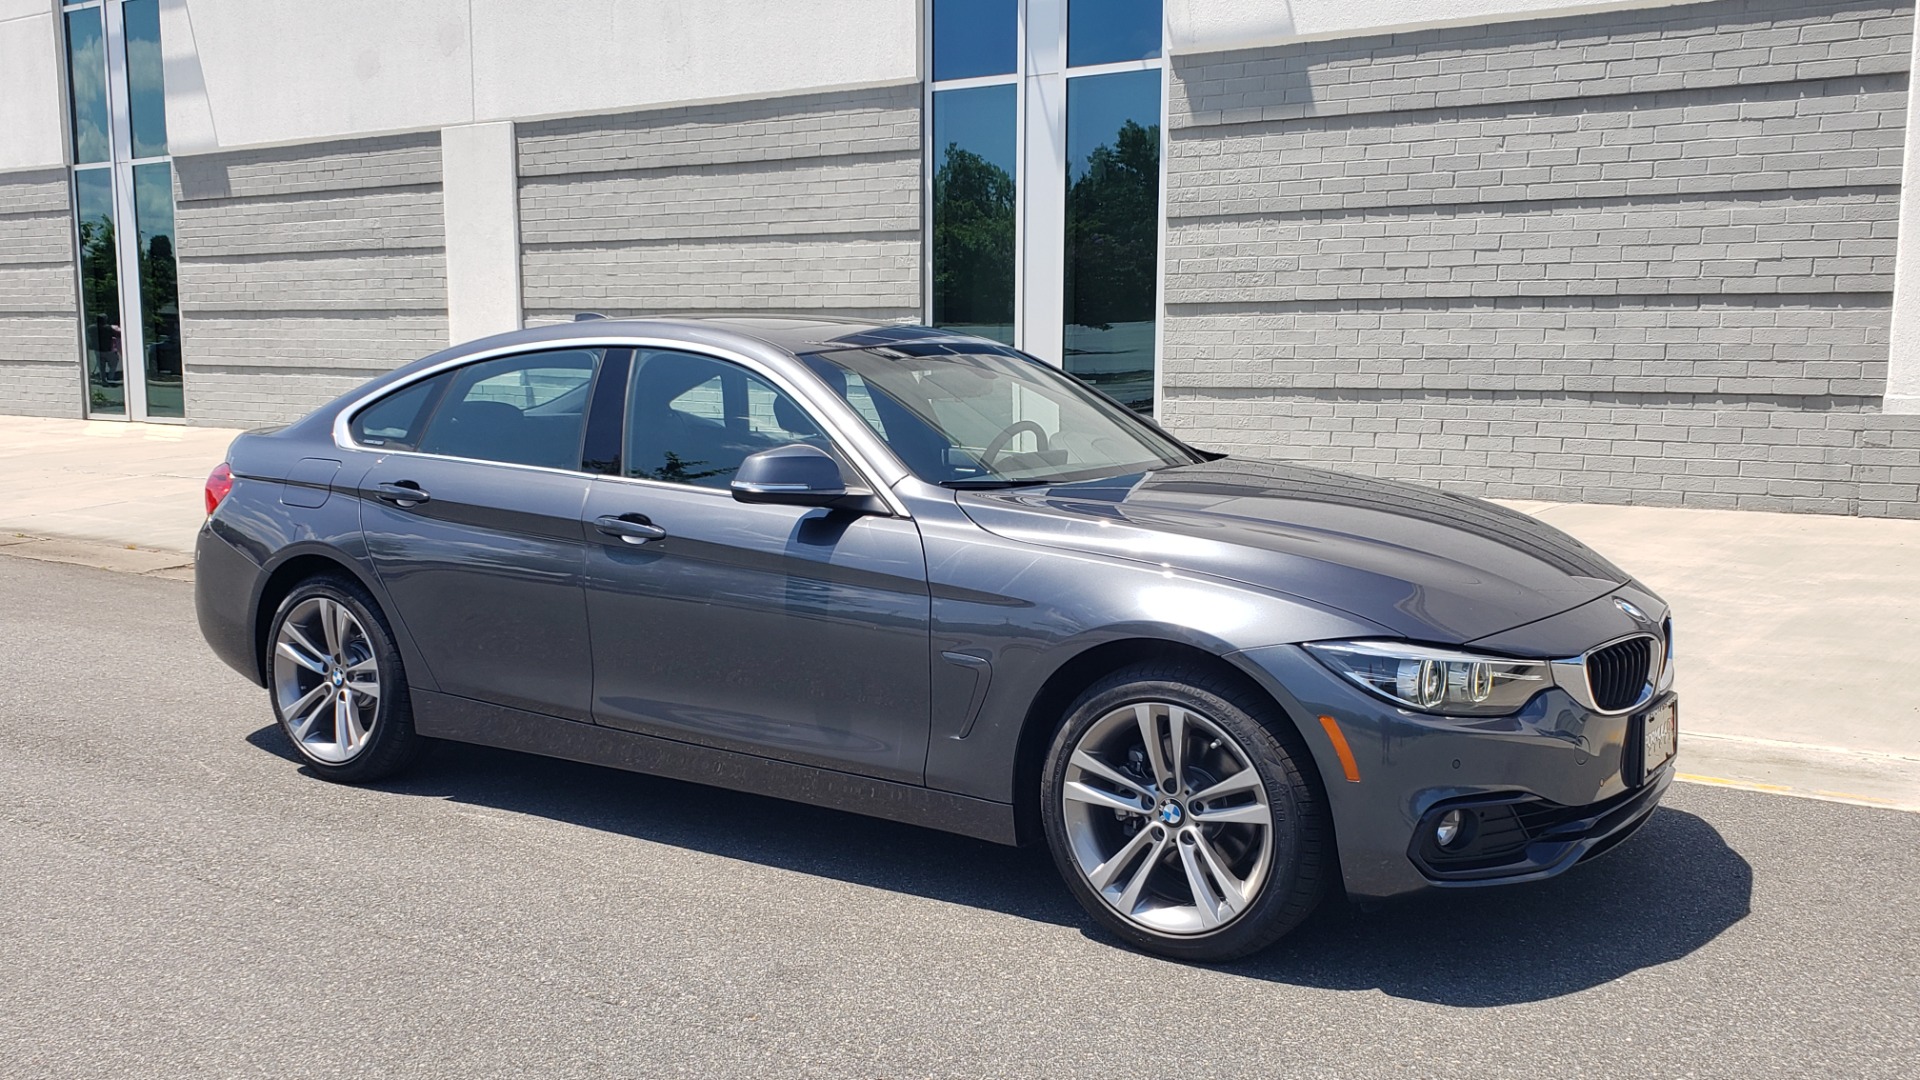 Used 2018 BMW 4 SERIES 430I XDRIVE PREMIUM / NAV / SUNROOF / HTD STS / PDC / REARVIEW for sale Sold at Formula Imports in Charlotte NC 28227 8